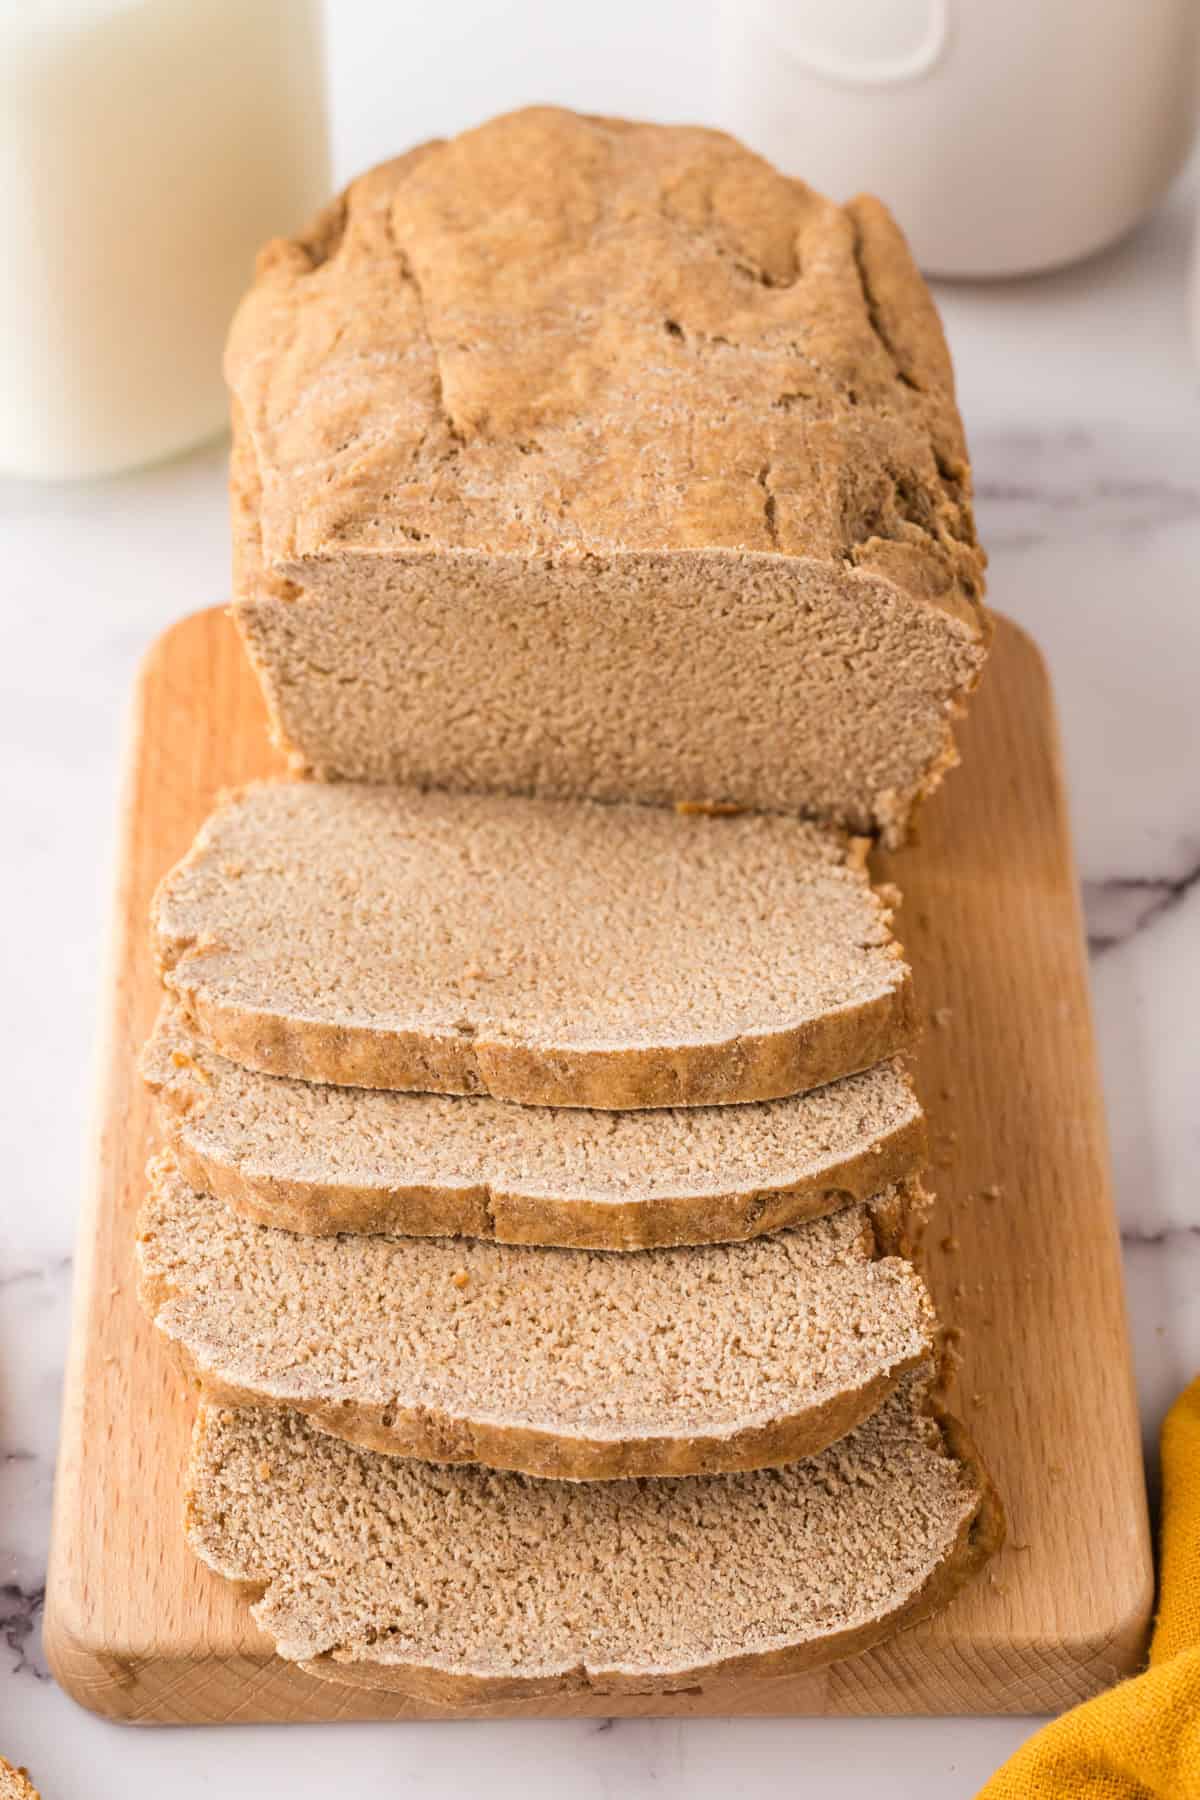 whole loaf with about half sliced and laid out of a fresh baked sandwich bread recipe.